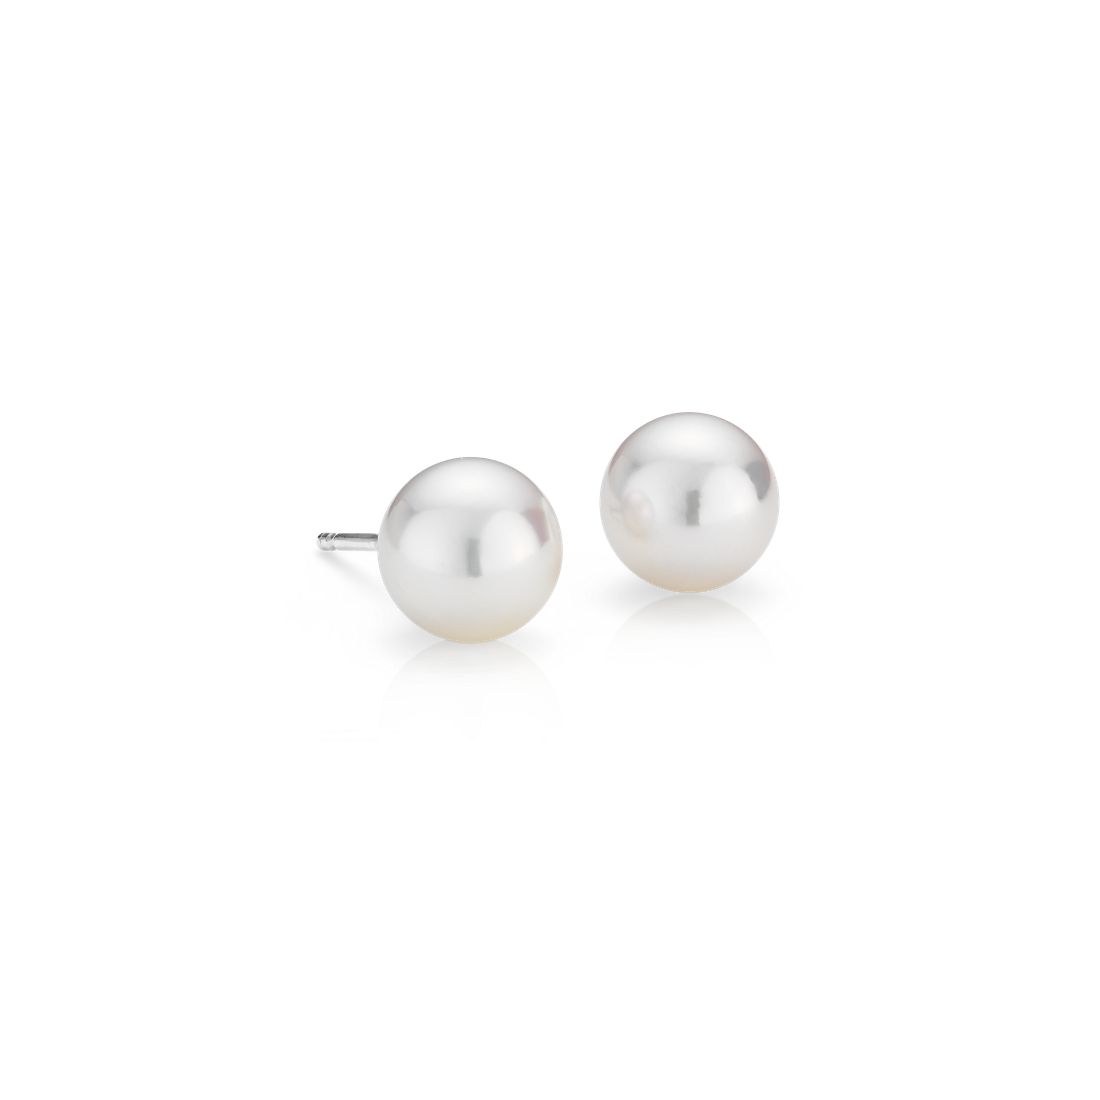 HXZZ 18K Gold or Sterling Silver Fine Jewelry Gifts for Women Akoya Round White Seawater Cultured Pearl Stud Earrings 